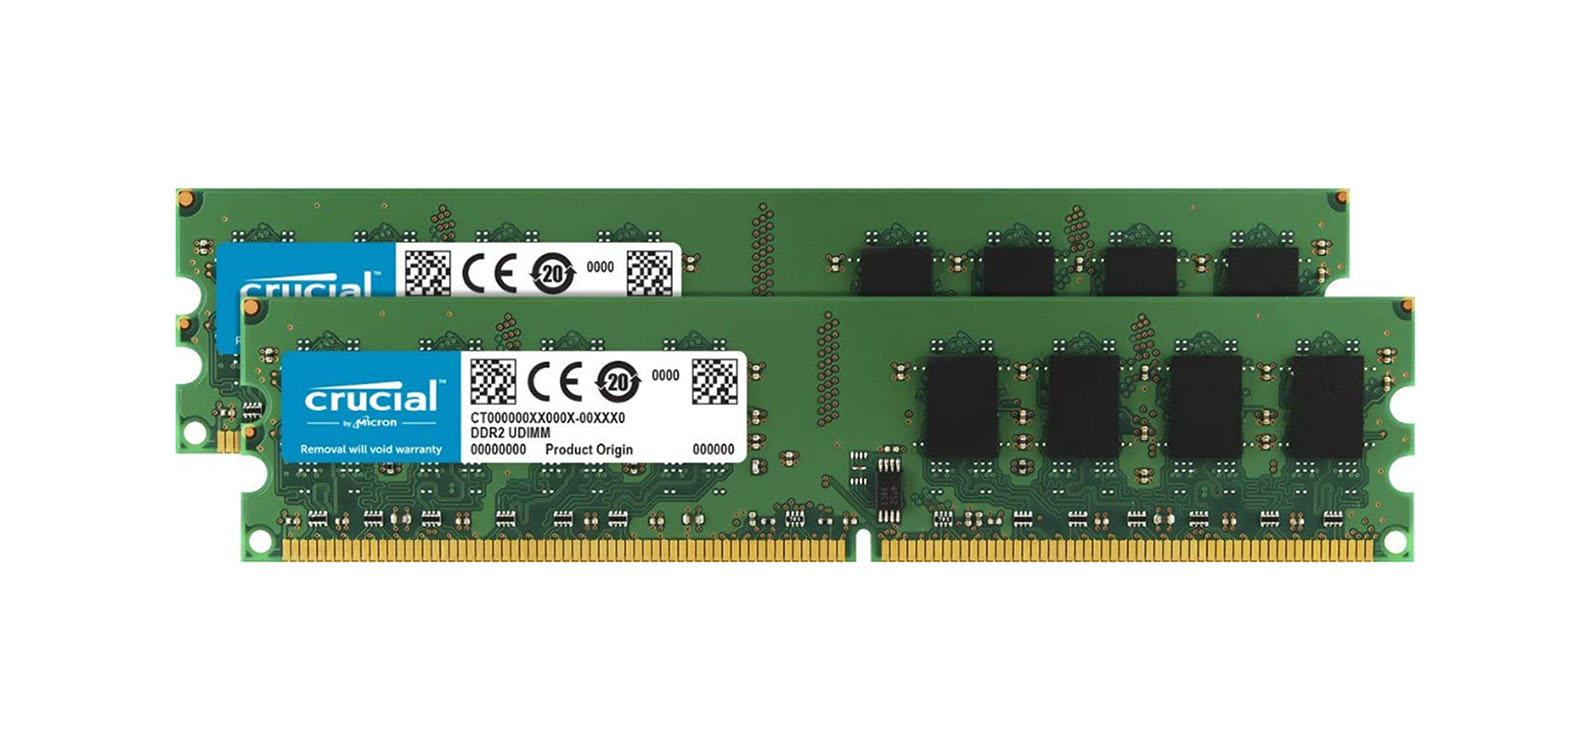 Crucial CT633621 8GB Kit (2 x 4GB) DDR2-667MHz PC2-5300 ECC Fully Buffered CL5 240-Pin DIMM Memory Upgrade for ASUS RS260-E4/RX8